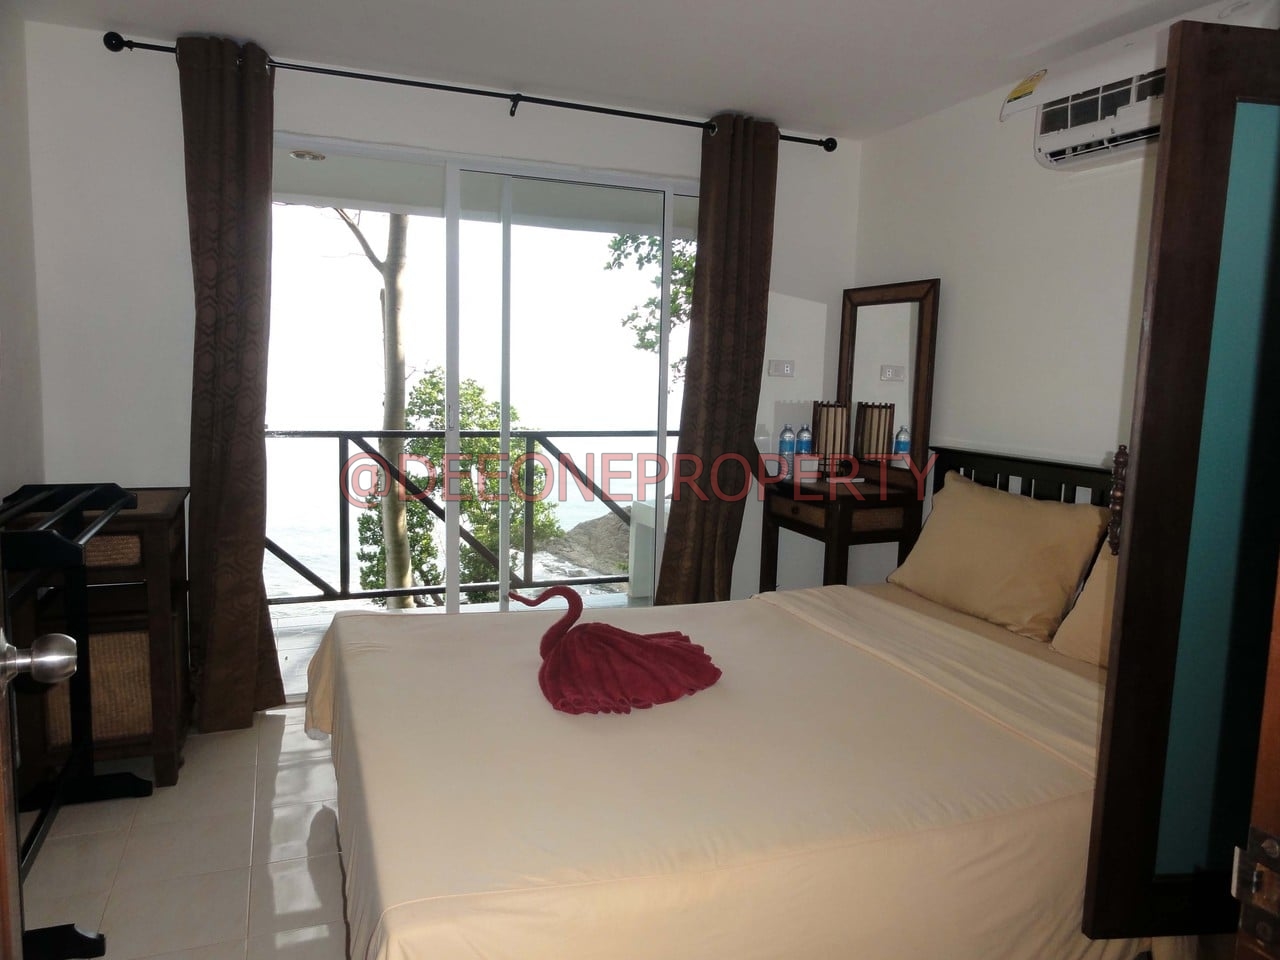 Cute bungalow with seaview for rent – South West Coast, Koh Chang